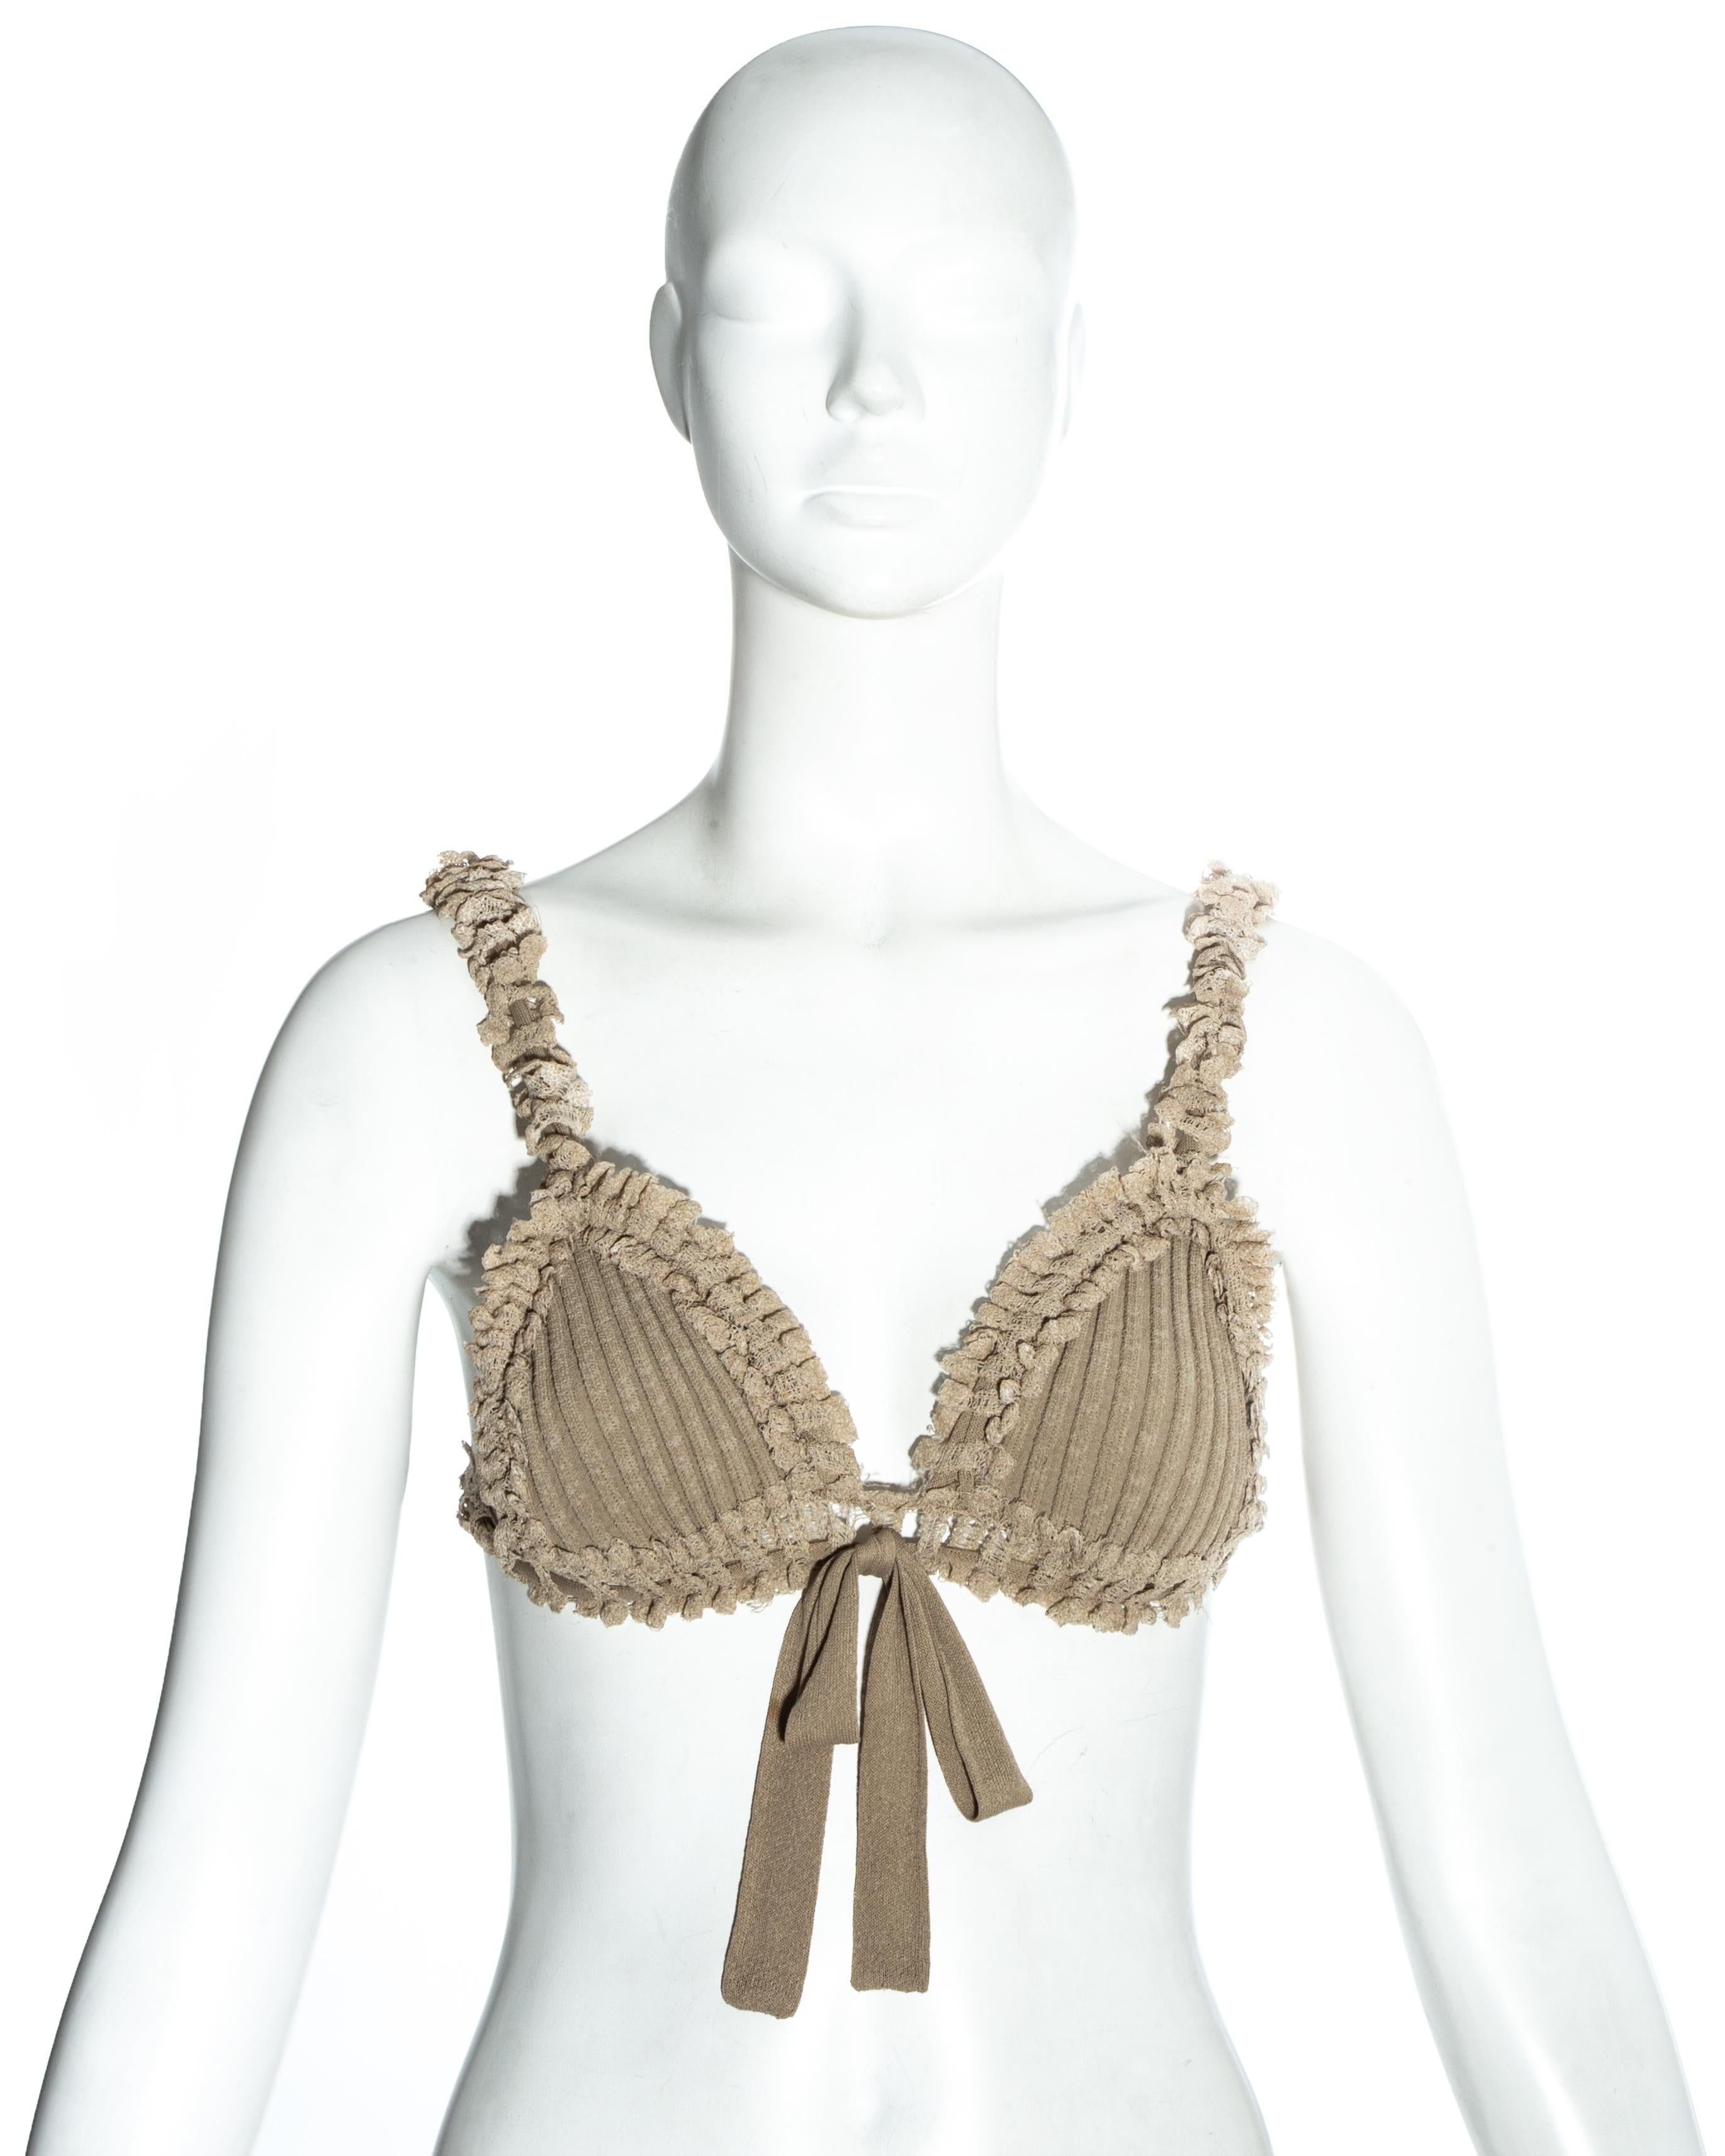 Vivienne Westwood taupe rib-knit bra with lace trim and drawstring bow fastening

Spring-Summer 1996